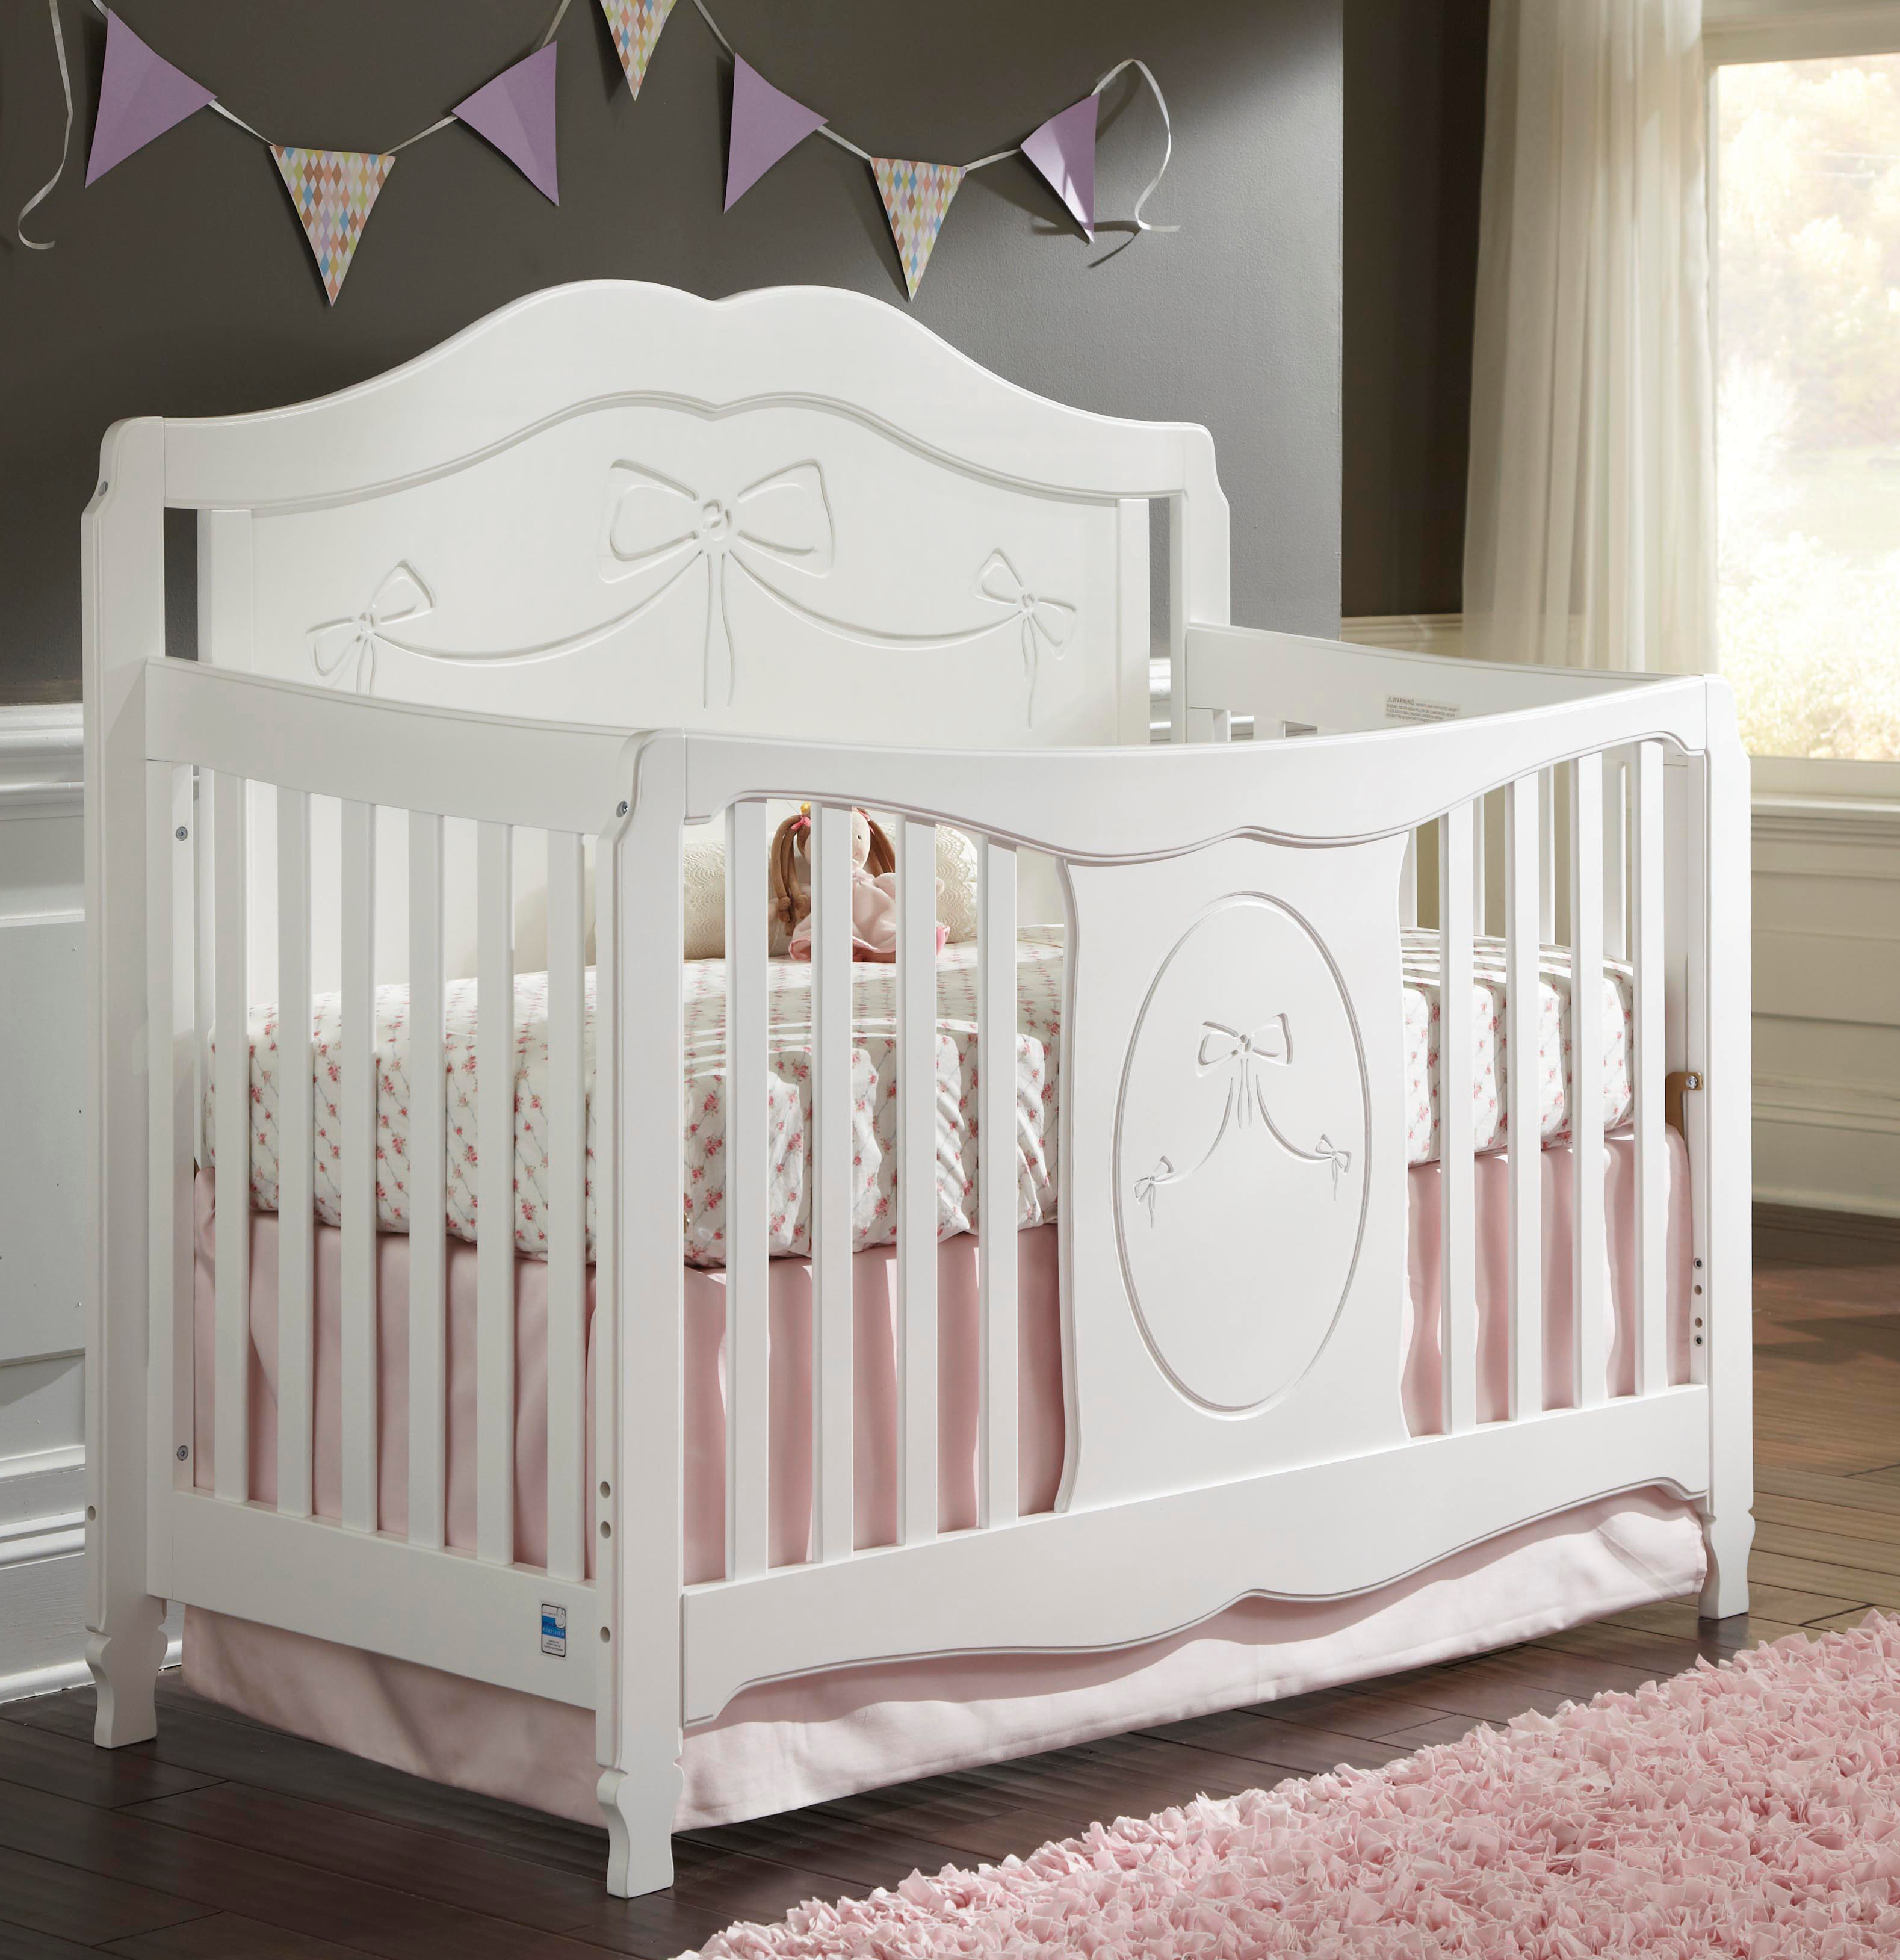 Storkcraft 04587-151 Princess Fixed Side Convertible Crib in White